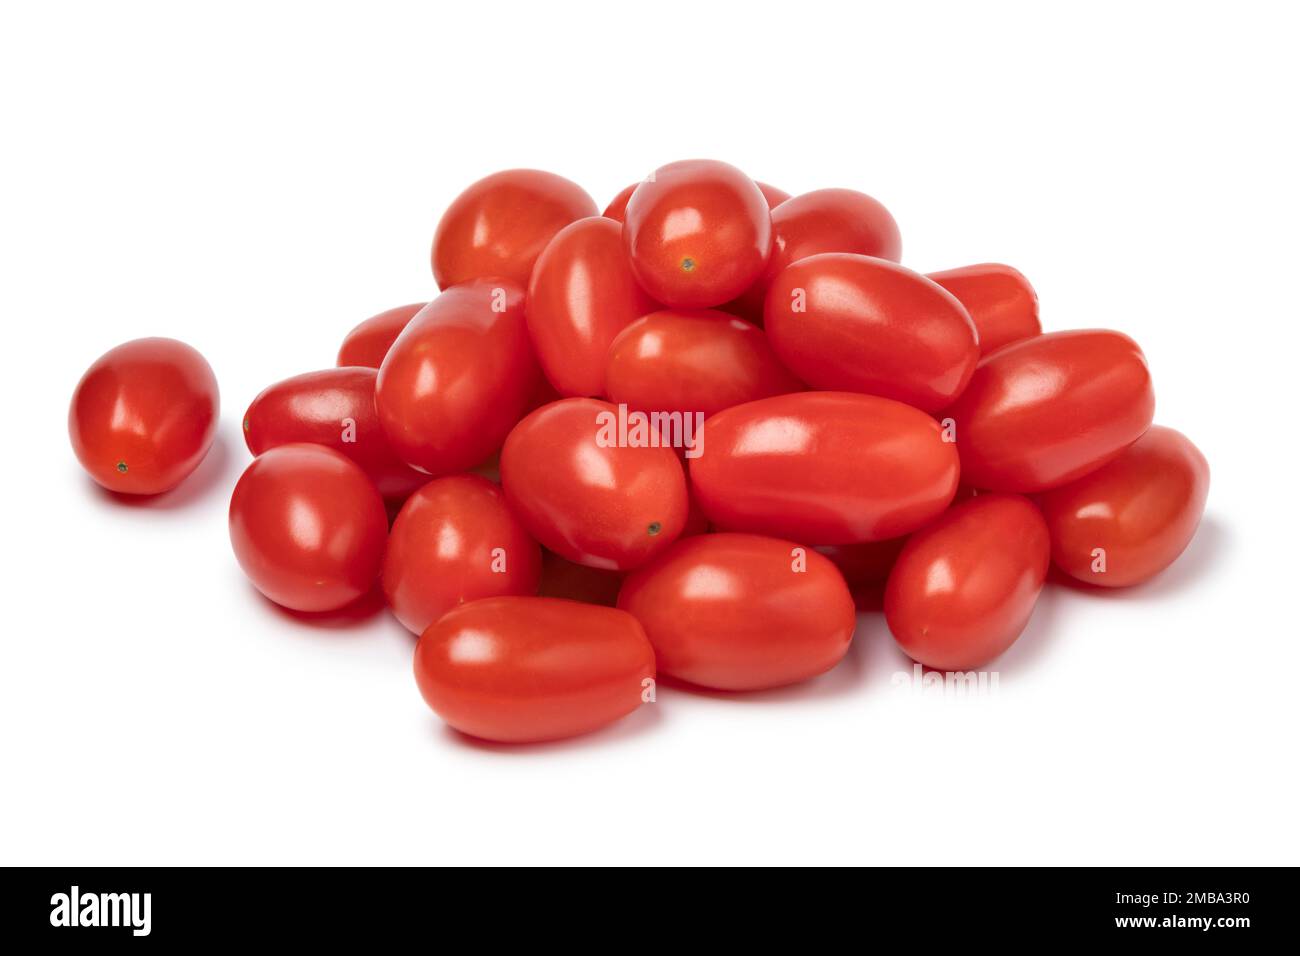 Heap of fresh small red sweet snack tomatoes isolated on white background Stock Photo